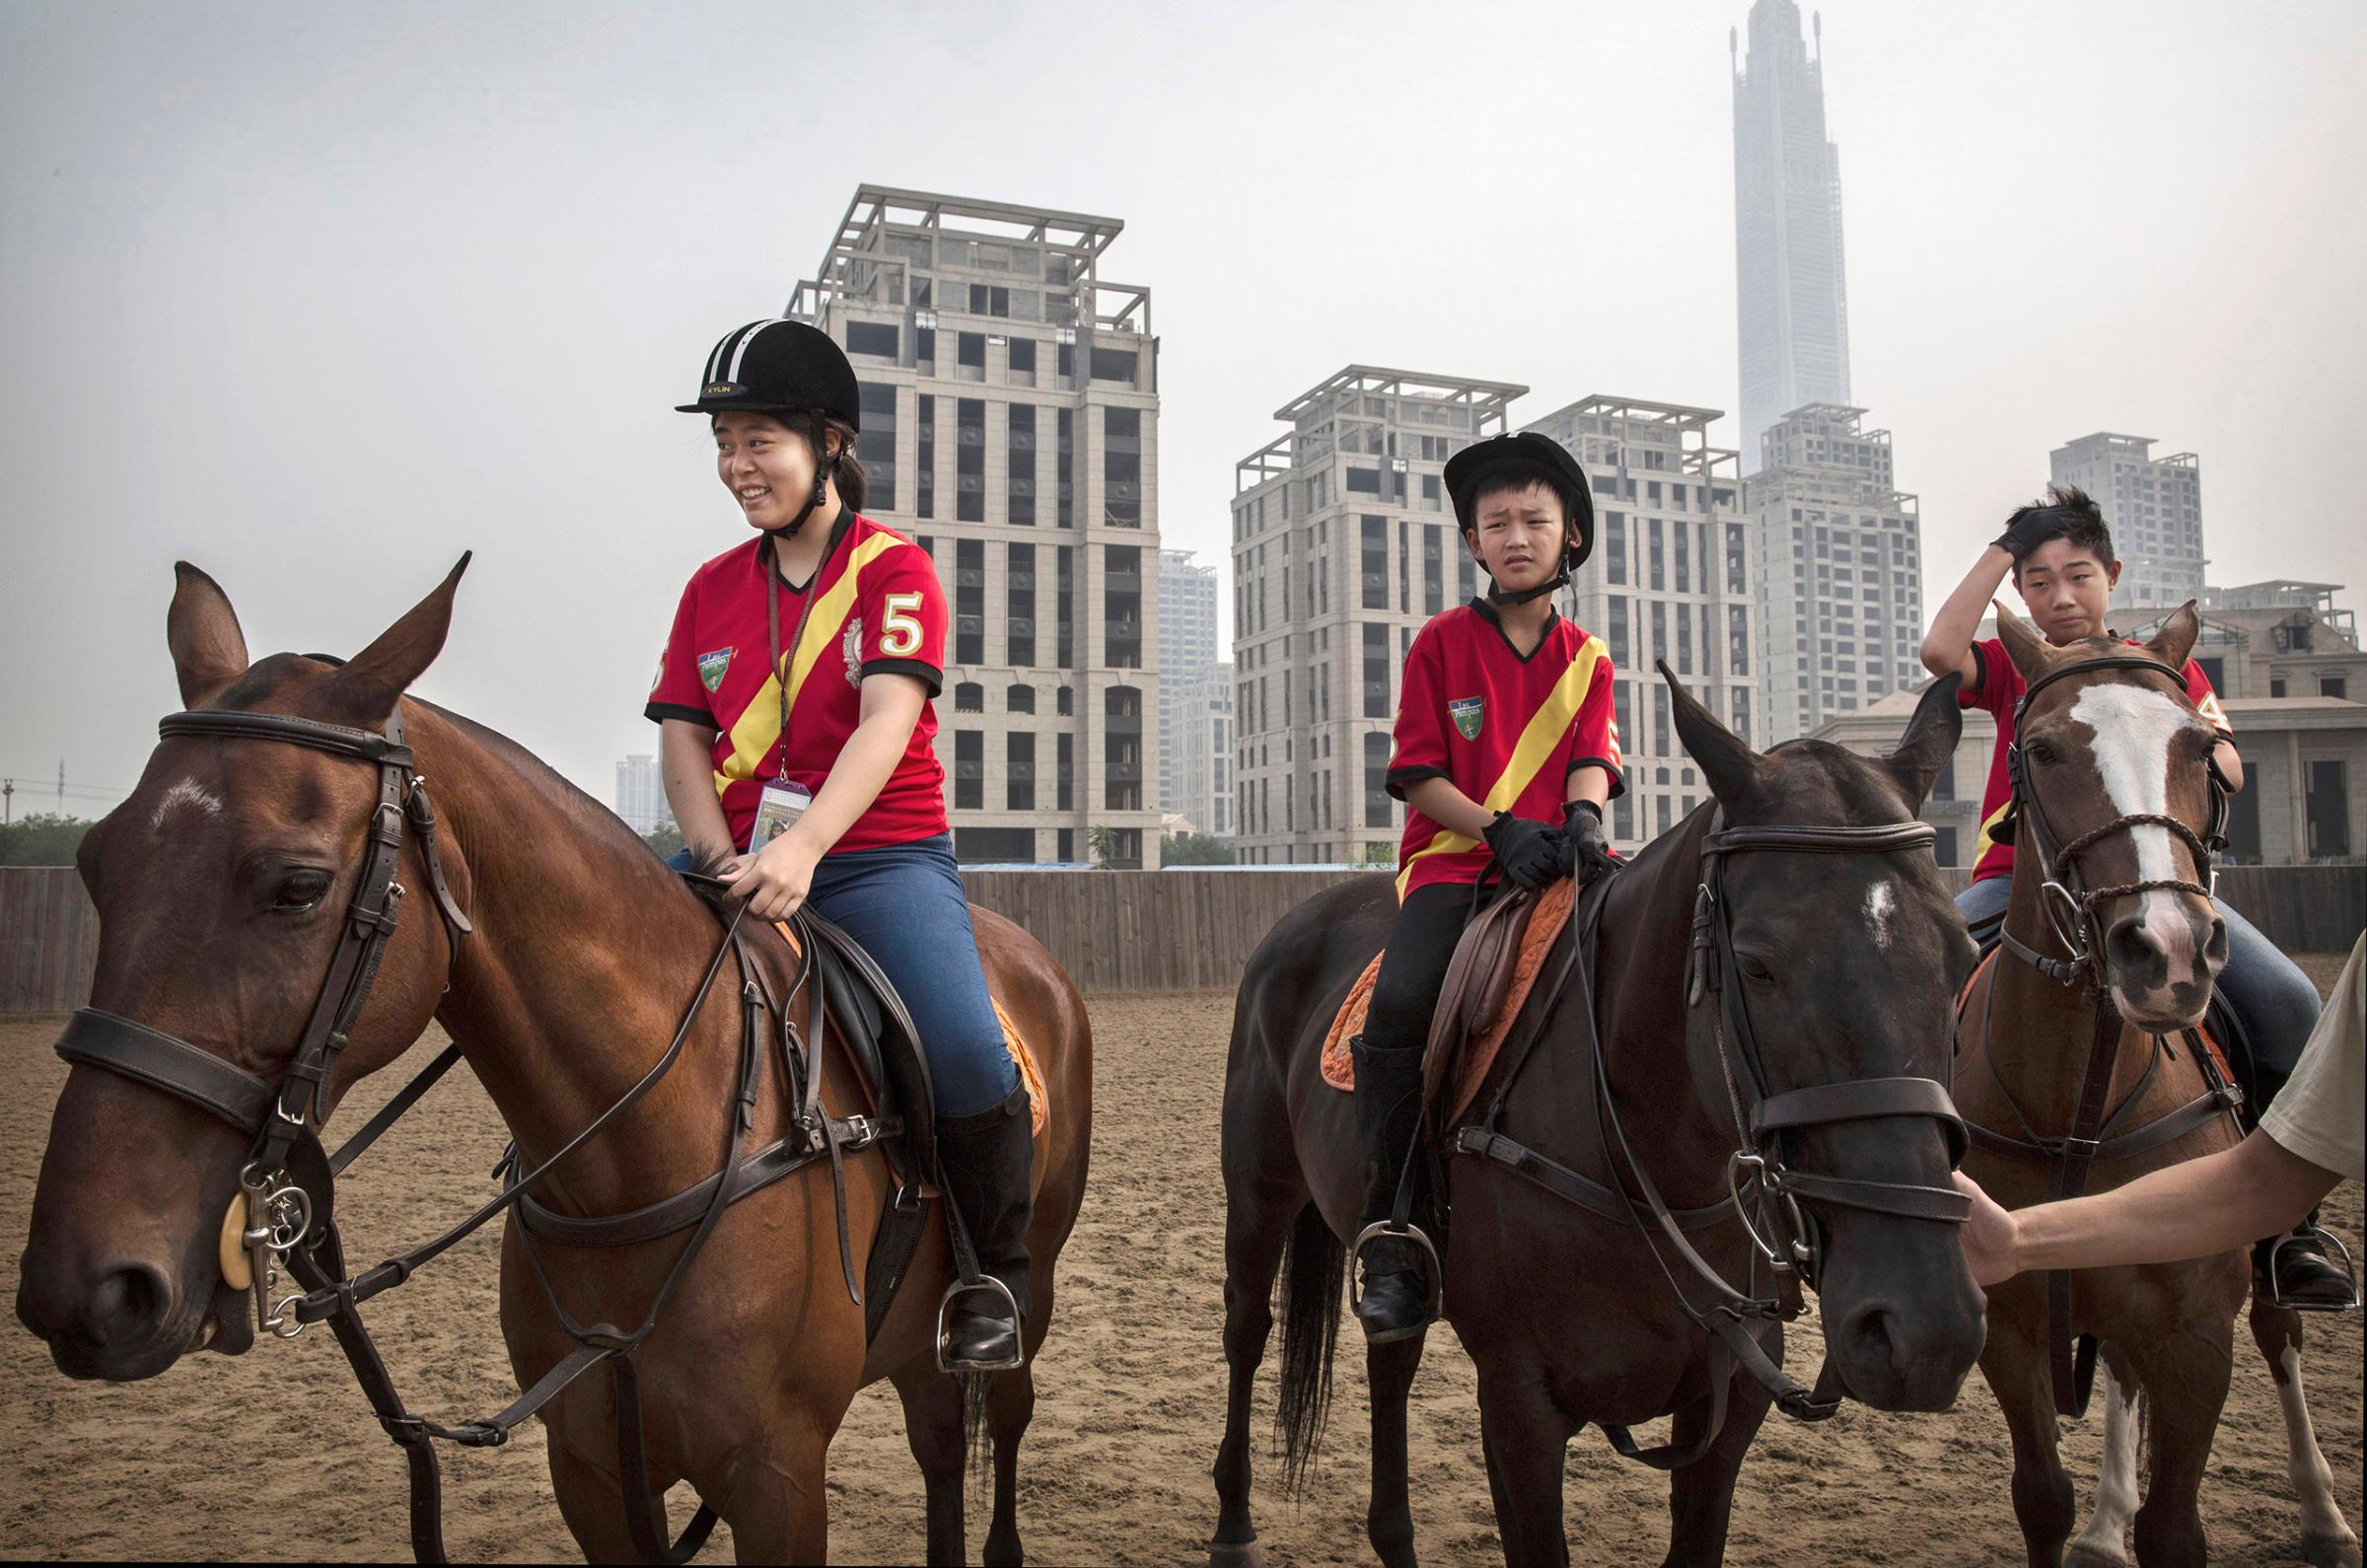 Young Chinese polo players from the Junior Polo Program learn riding skills at a summer training camp held at the Tianjin Goldin Metropolitan Polo Club in Tianjin, China, on July 17, 2016.